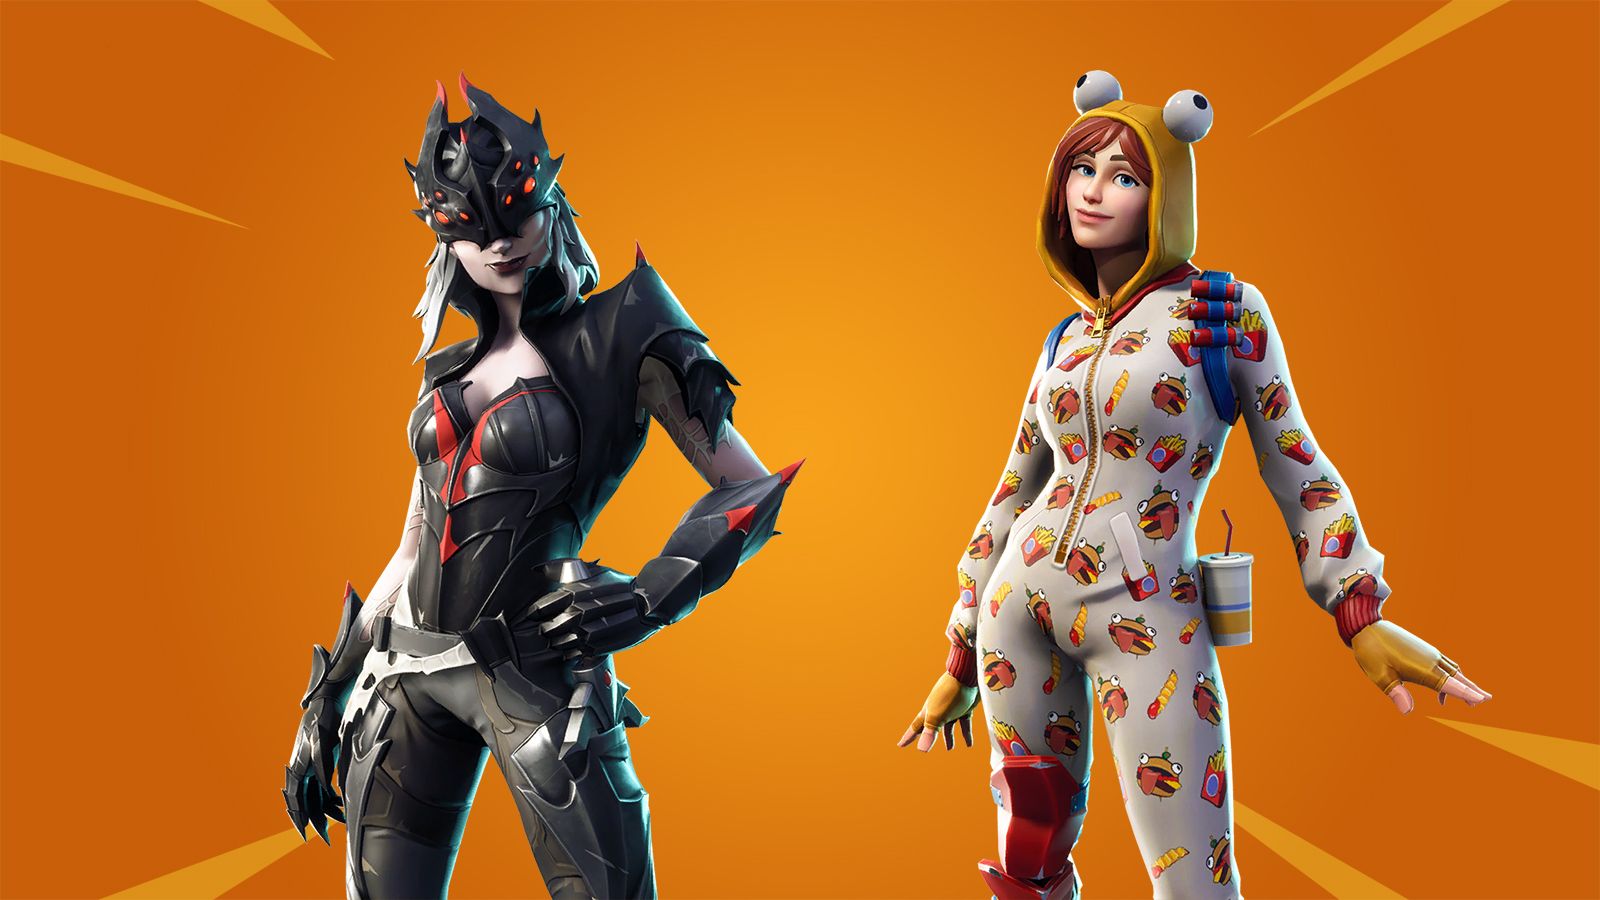 Upcoming cosmetics found in Patch v6.10 files